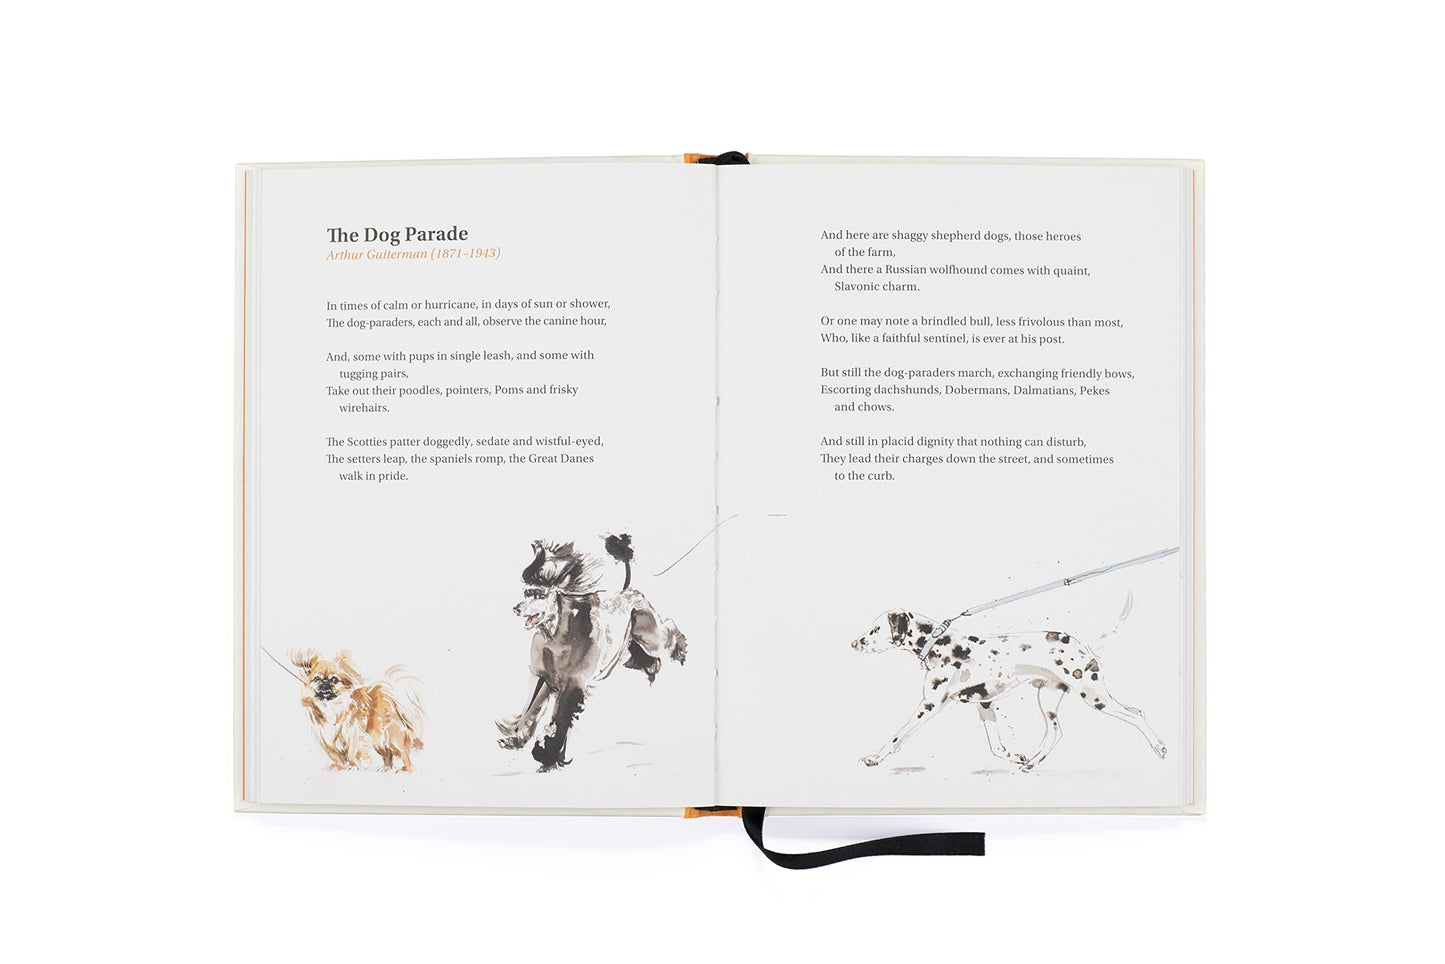 Book of Dog Poems